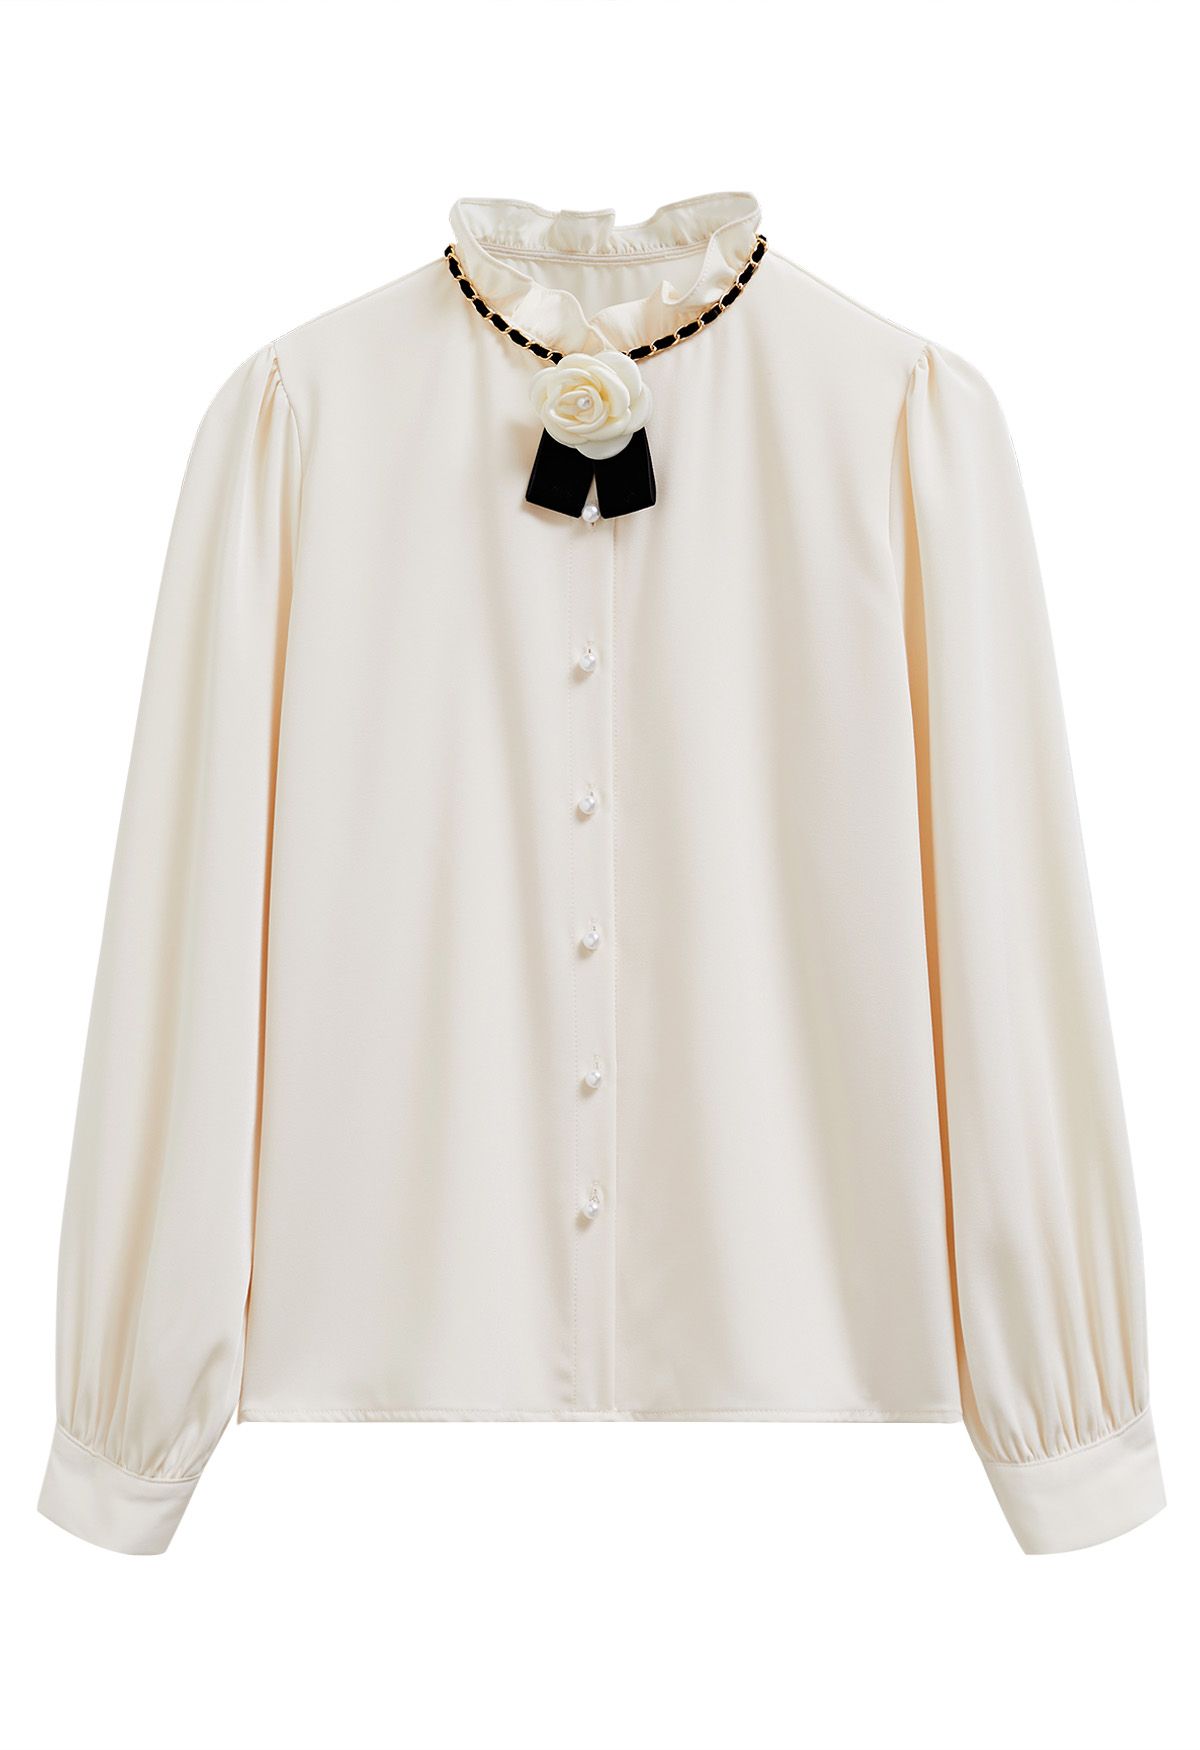 Pearly Rose Chain Ruffle Neckline Buttoned Shirt in Cream